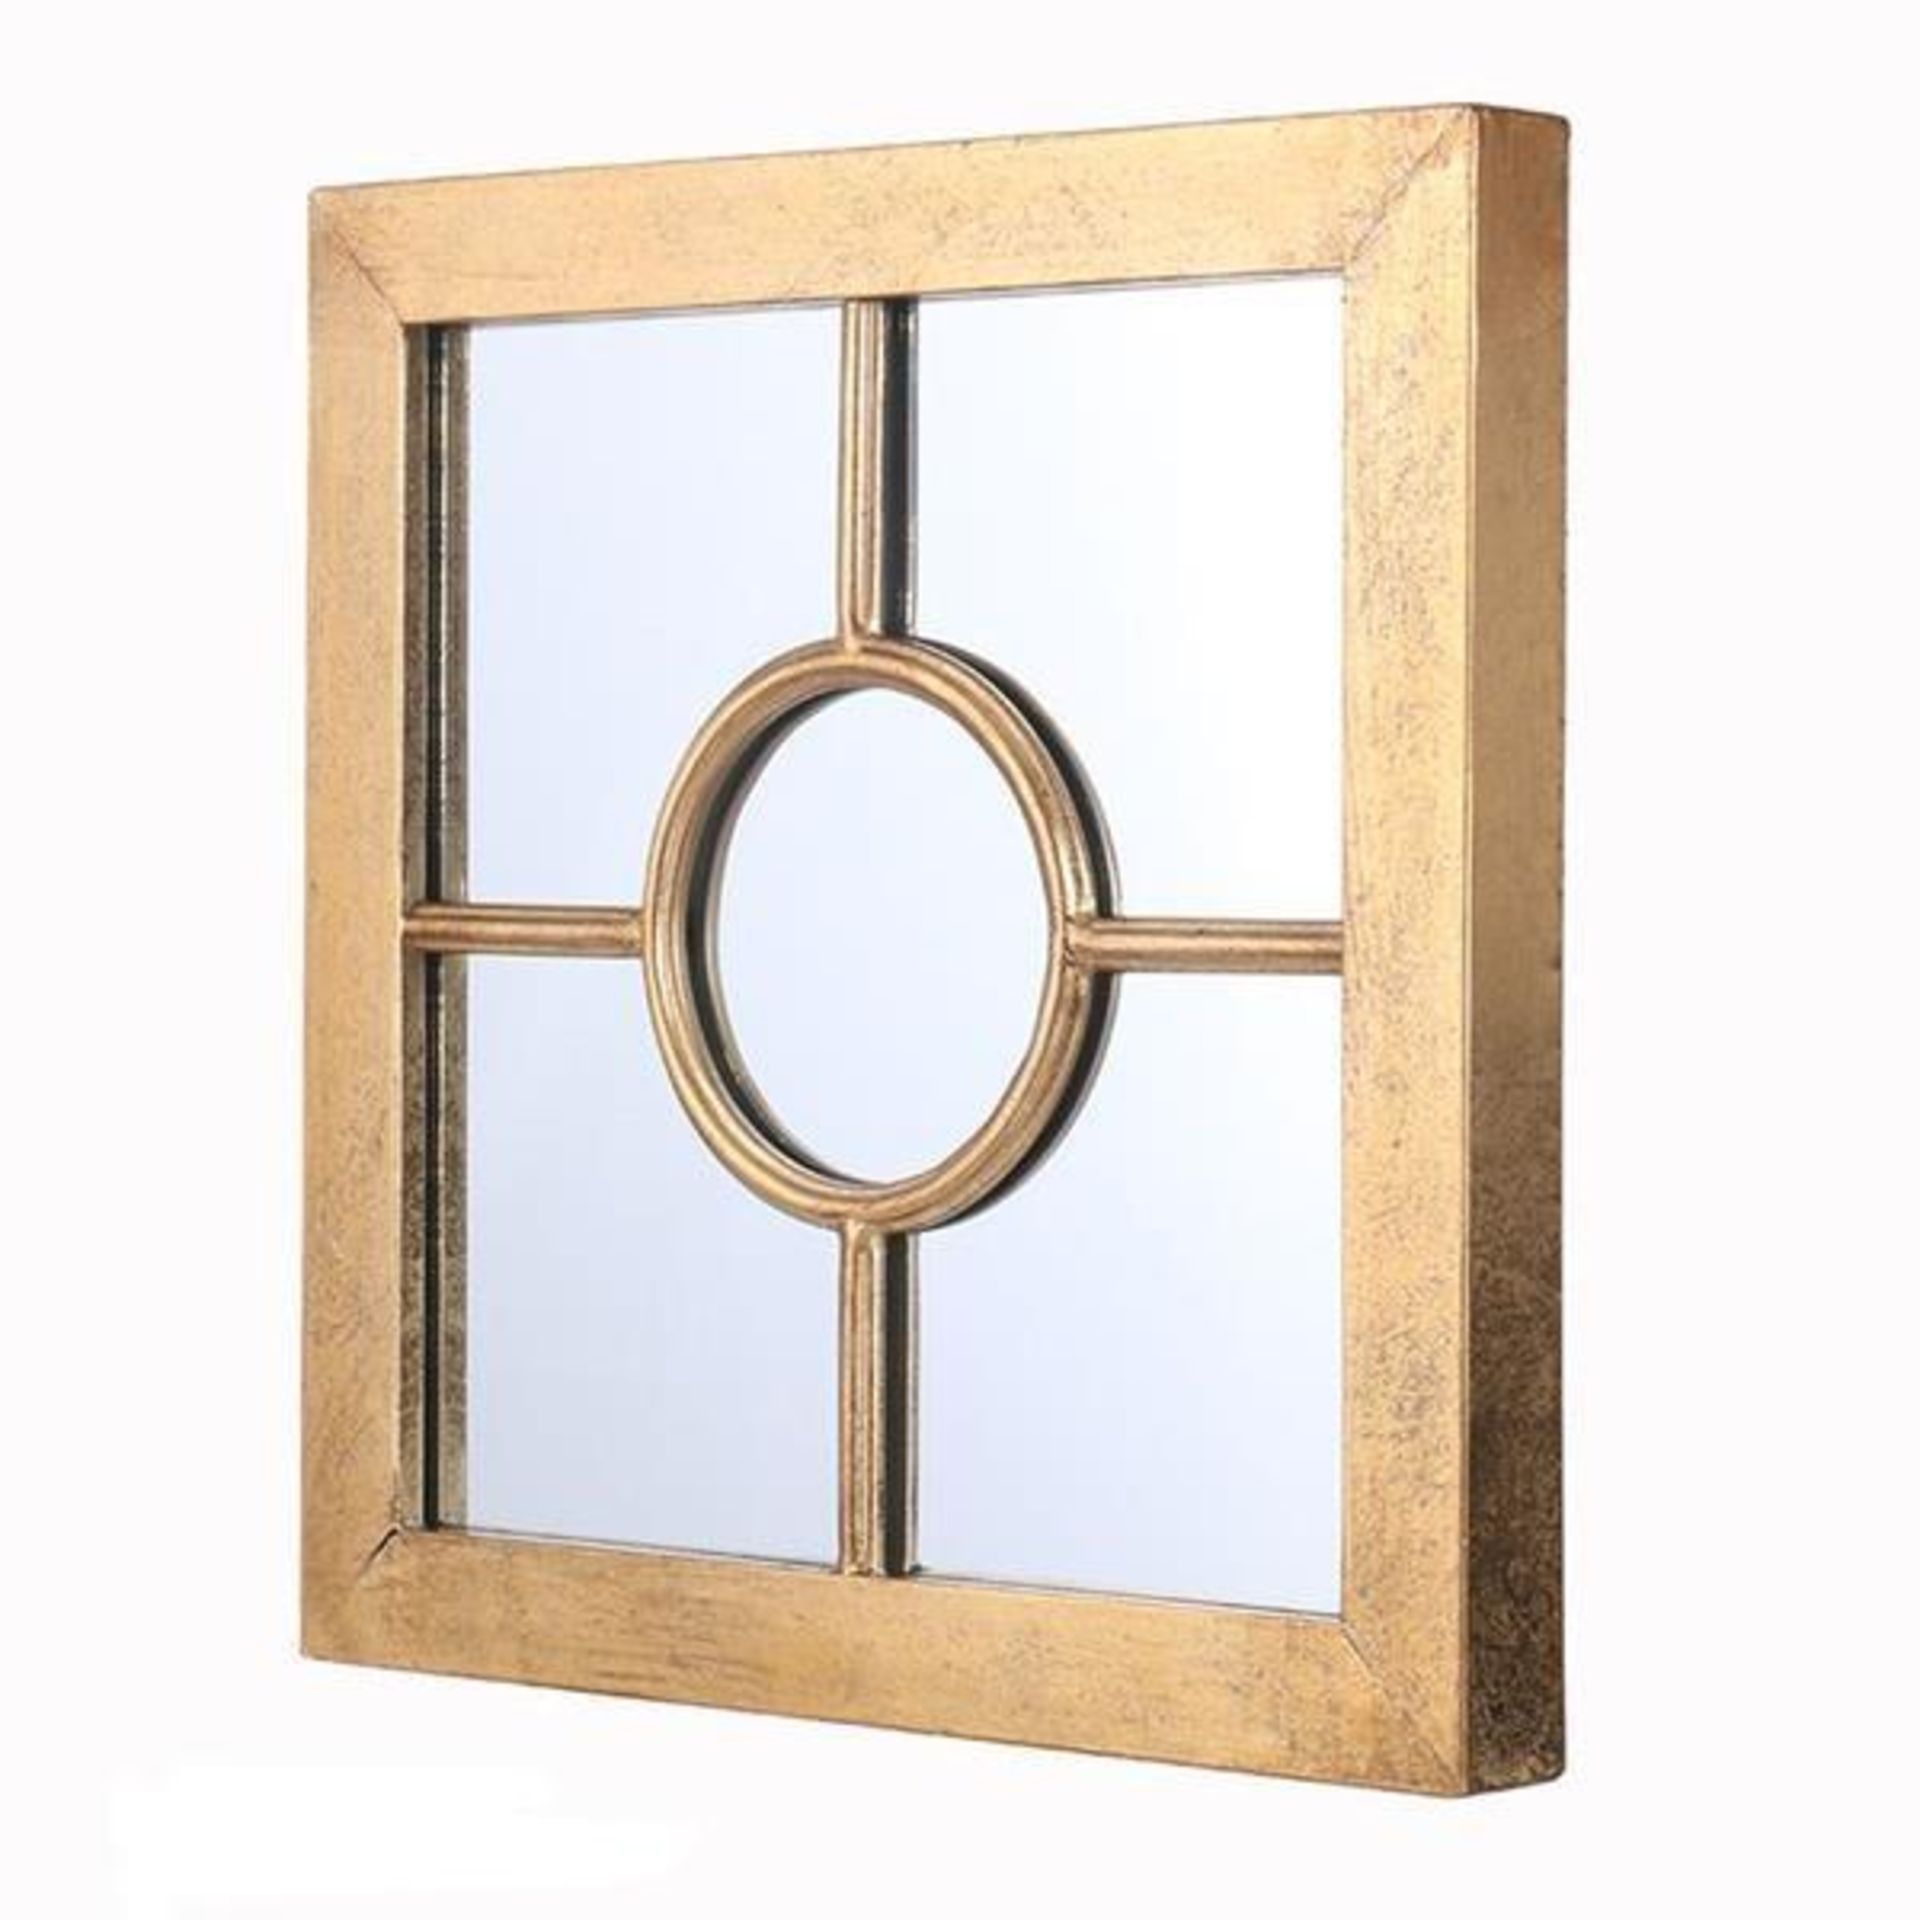 New Boxed Small Square Mirror In A Gold Finish (Approx 45cm) - Image 2 of 2